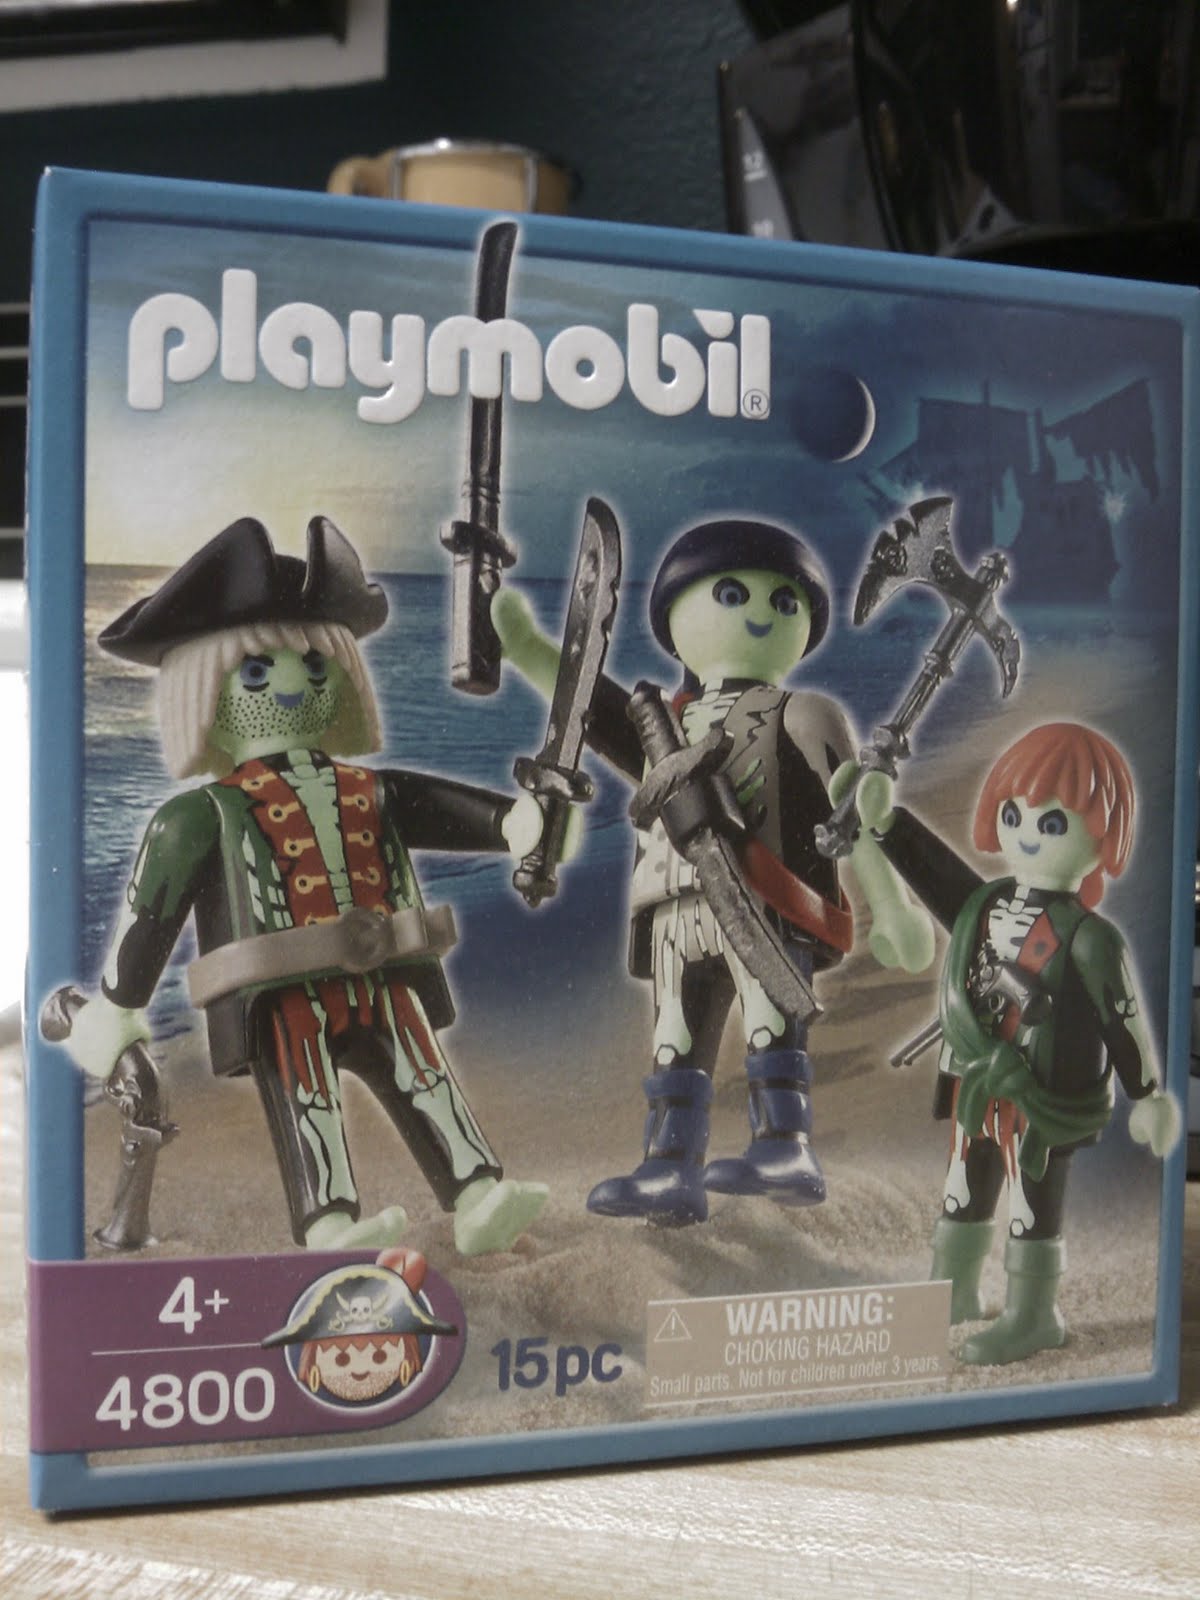 grundlæggende mudder Avenue Bobby Calabrese's OFFICIAL BLOG: Playmobil Zombie Pirates? Of Course!